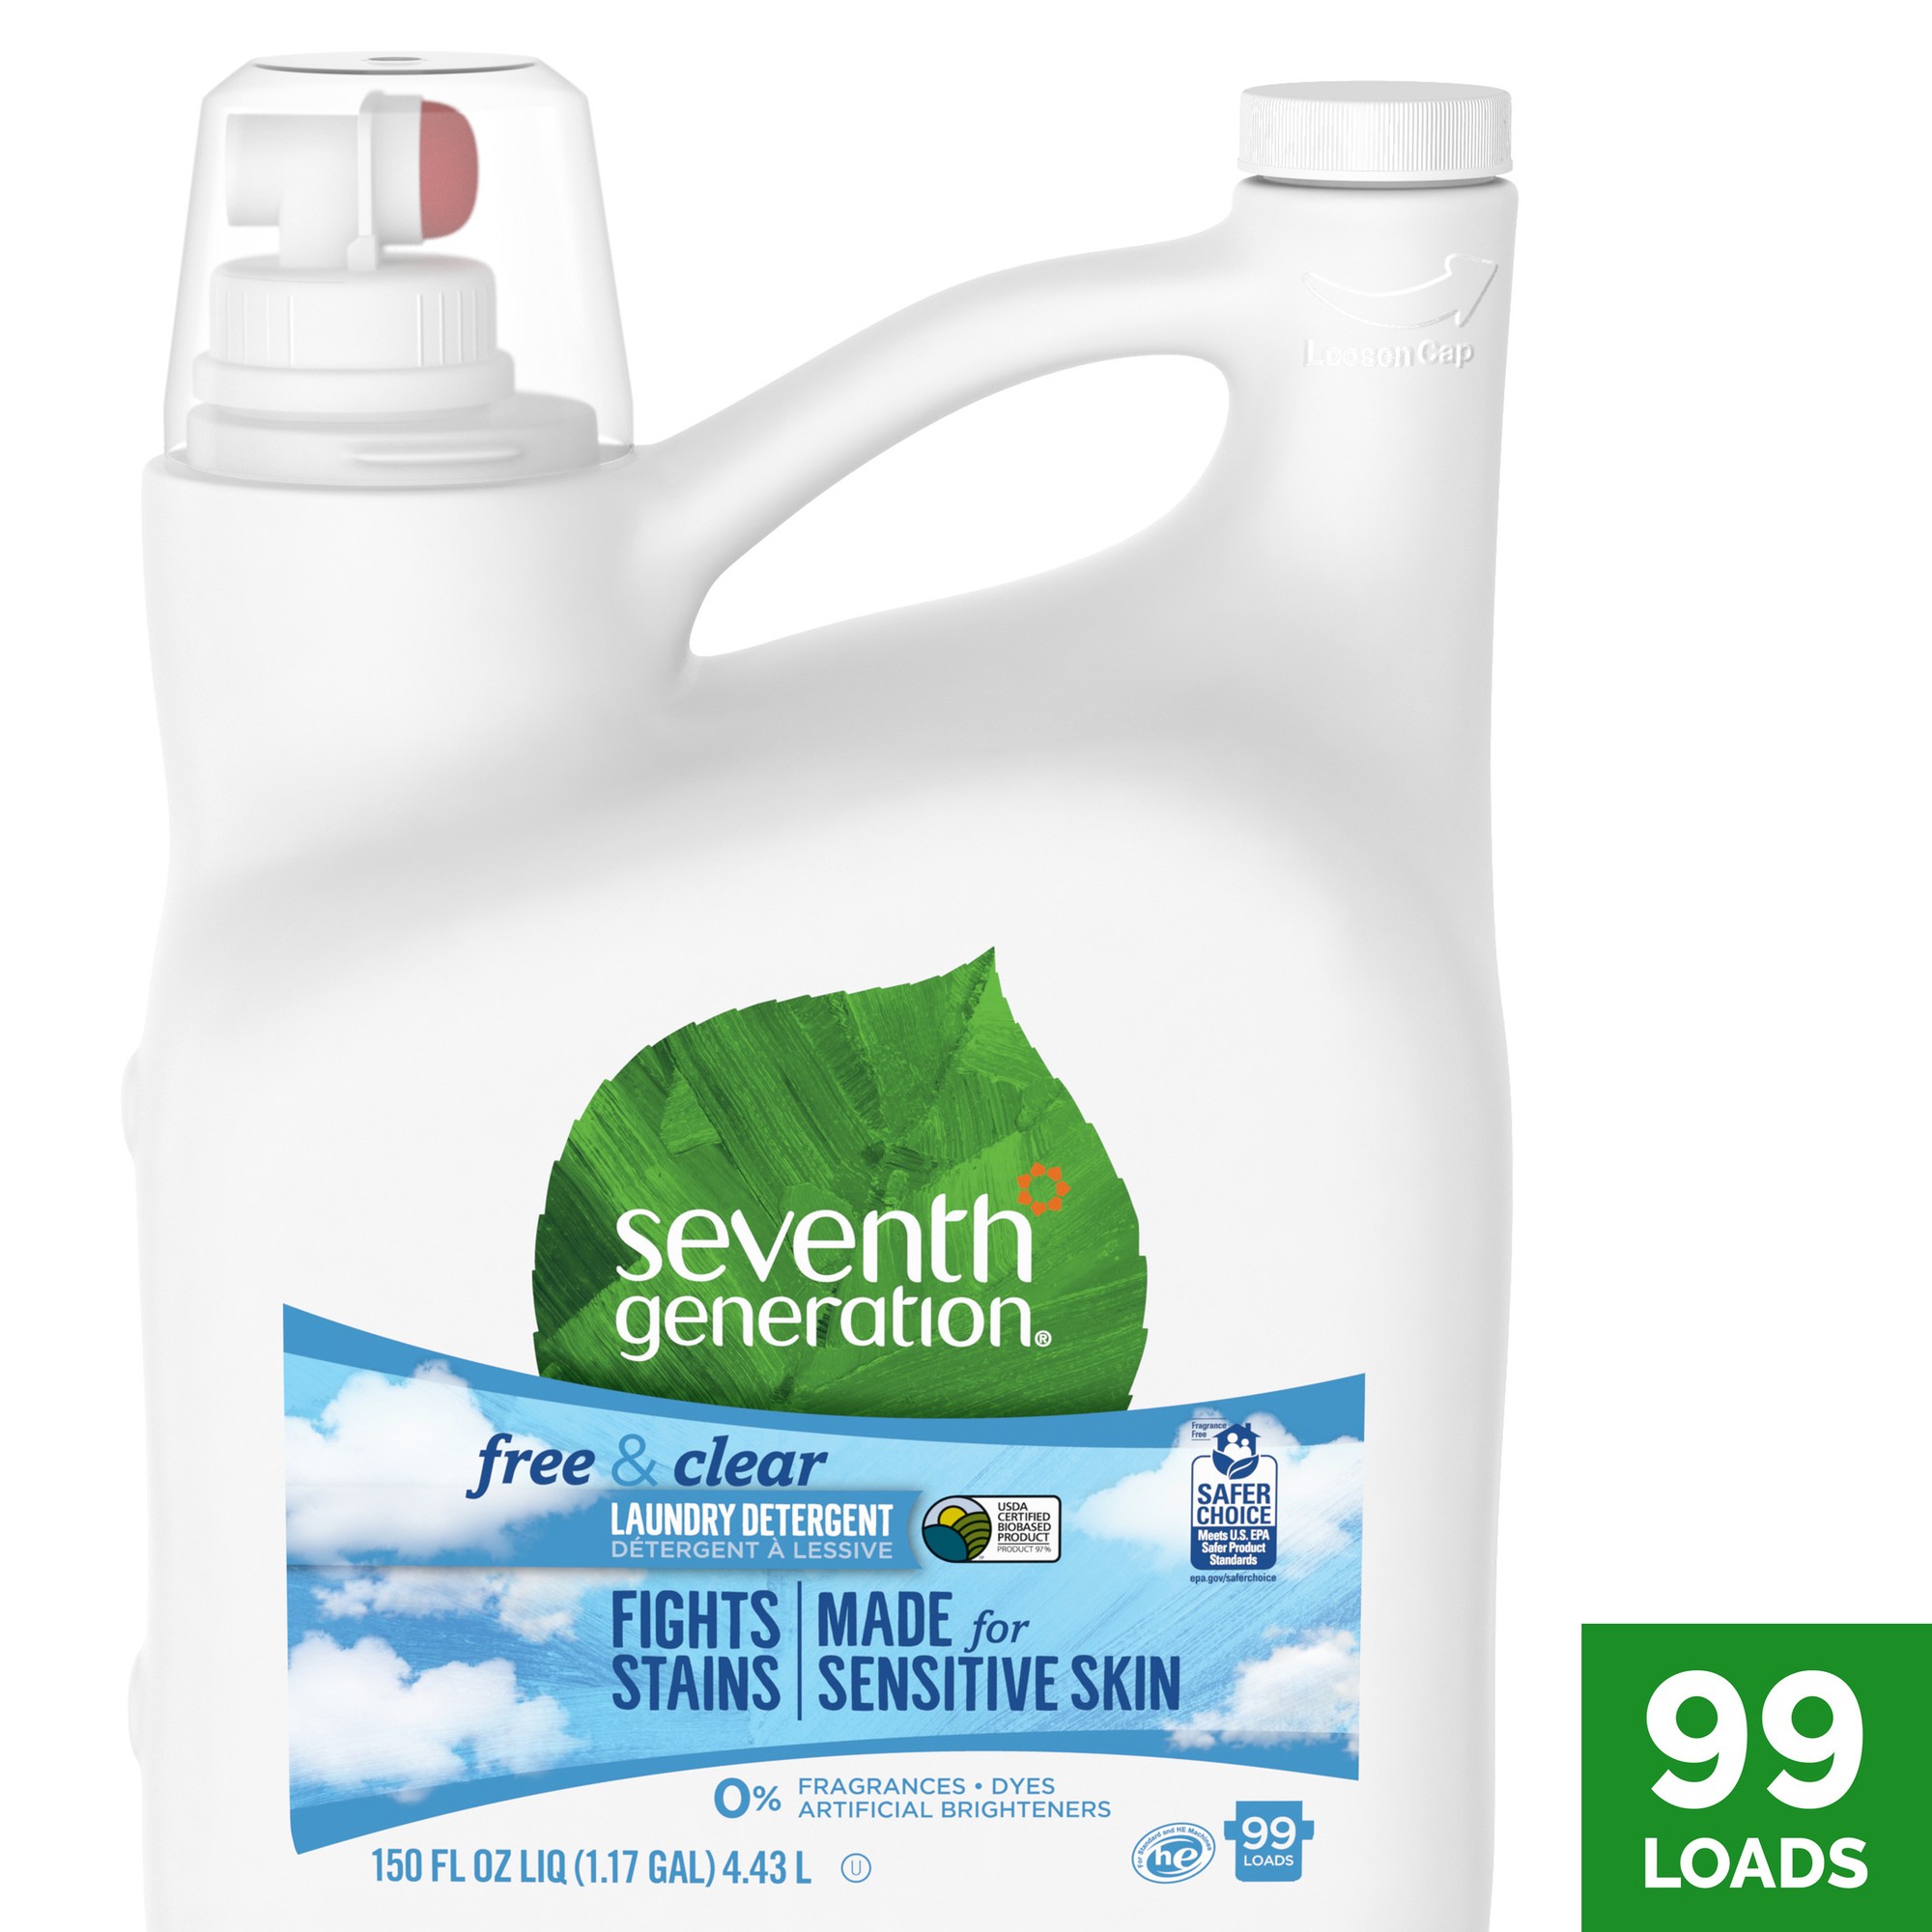 Natural 2X Concentrate Liquid Laundry Detergent, Free & Clear, 99 loads, 150oz